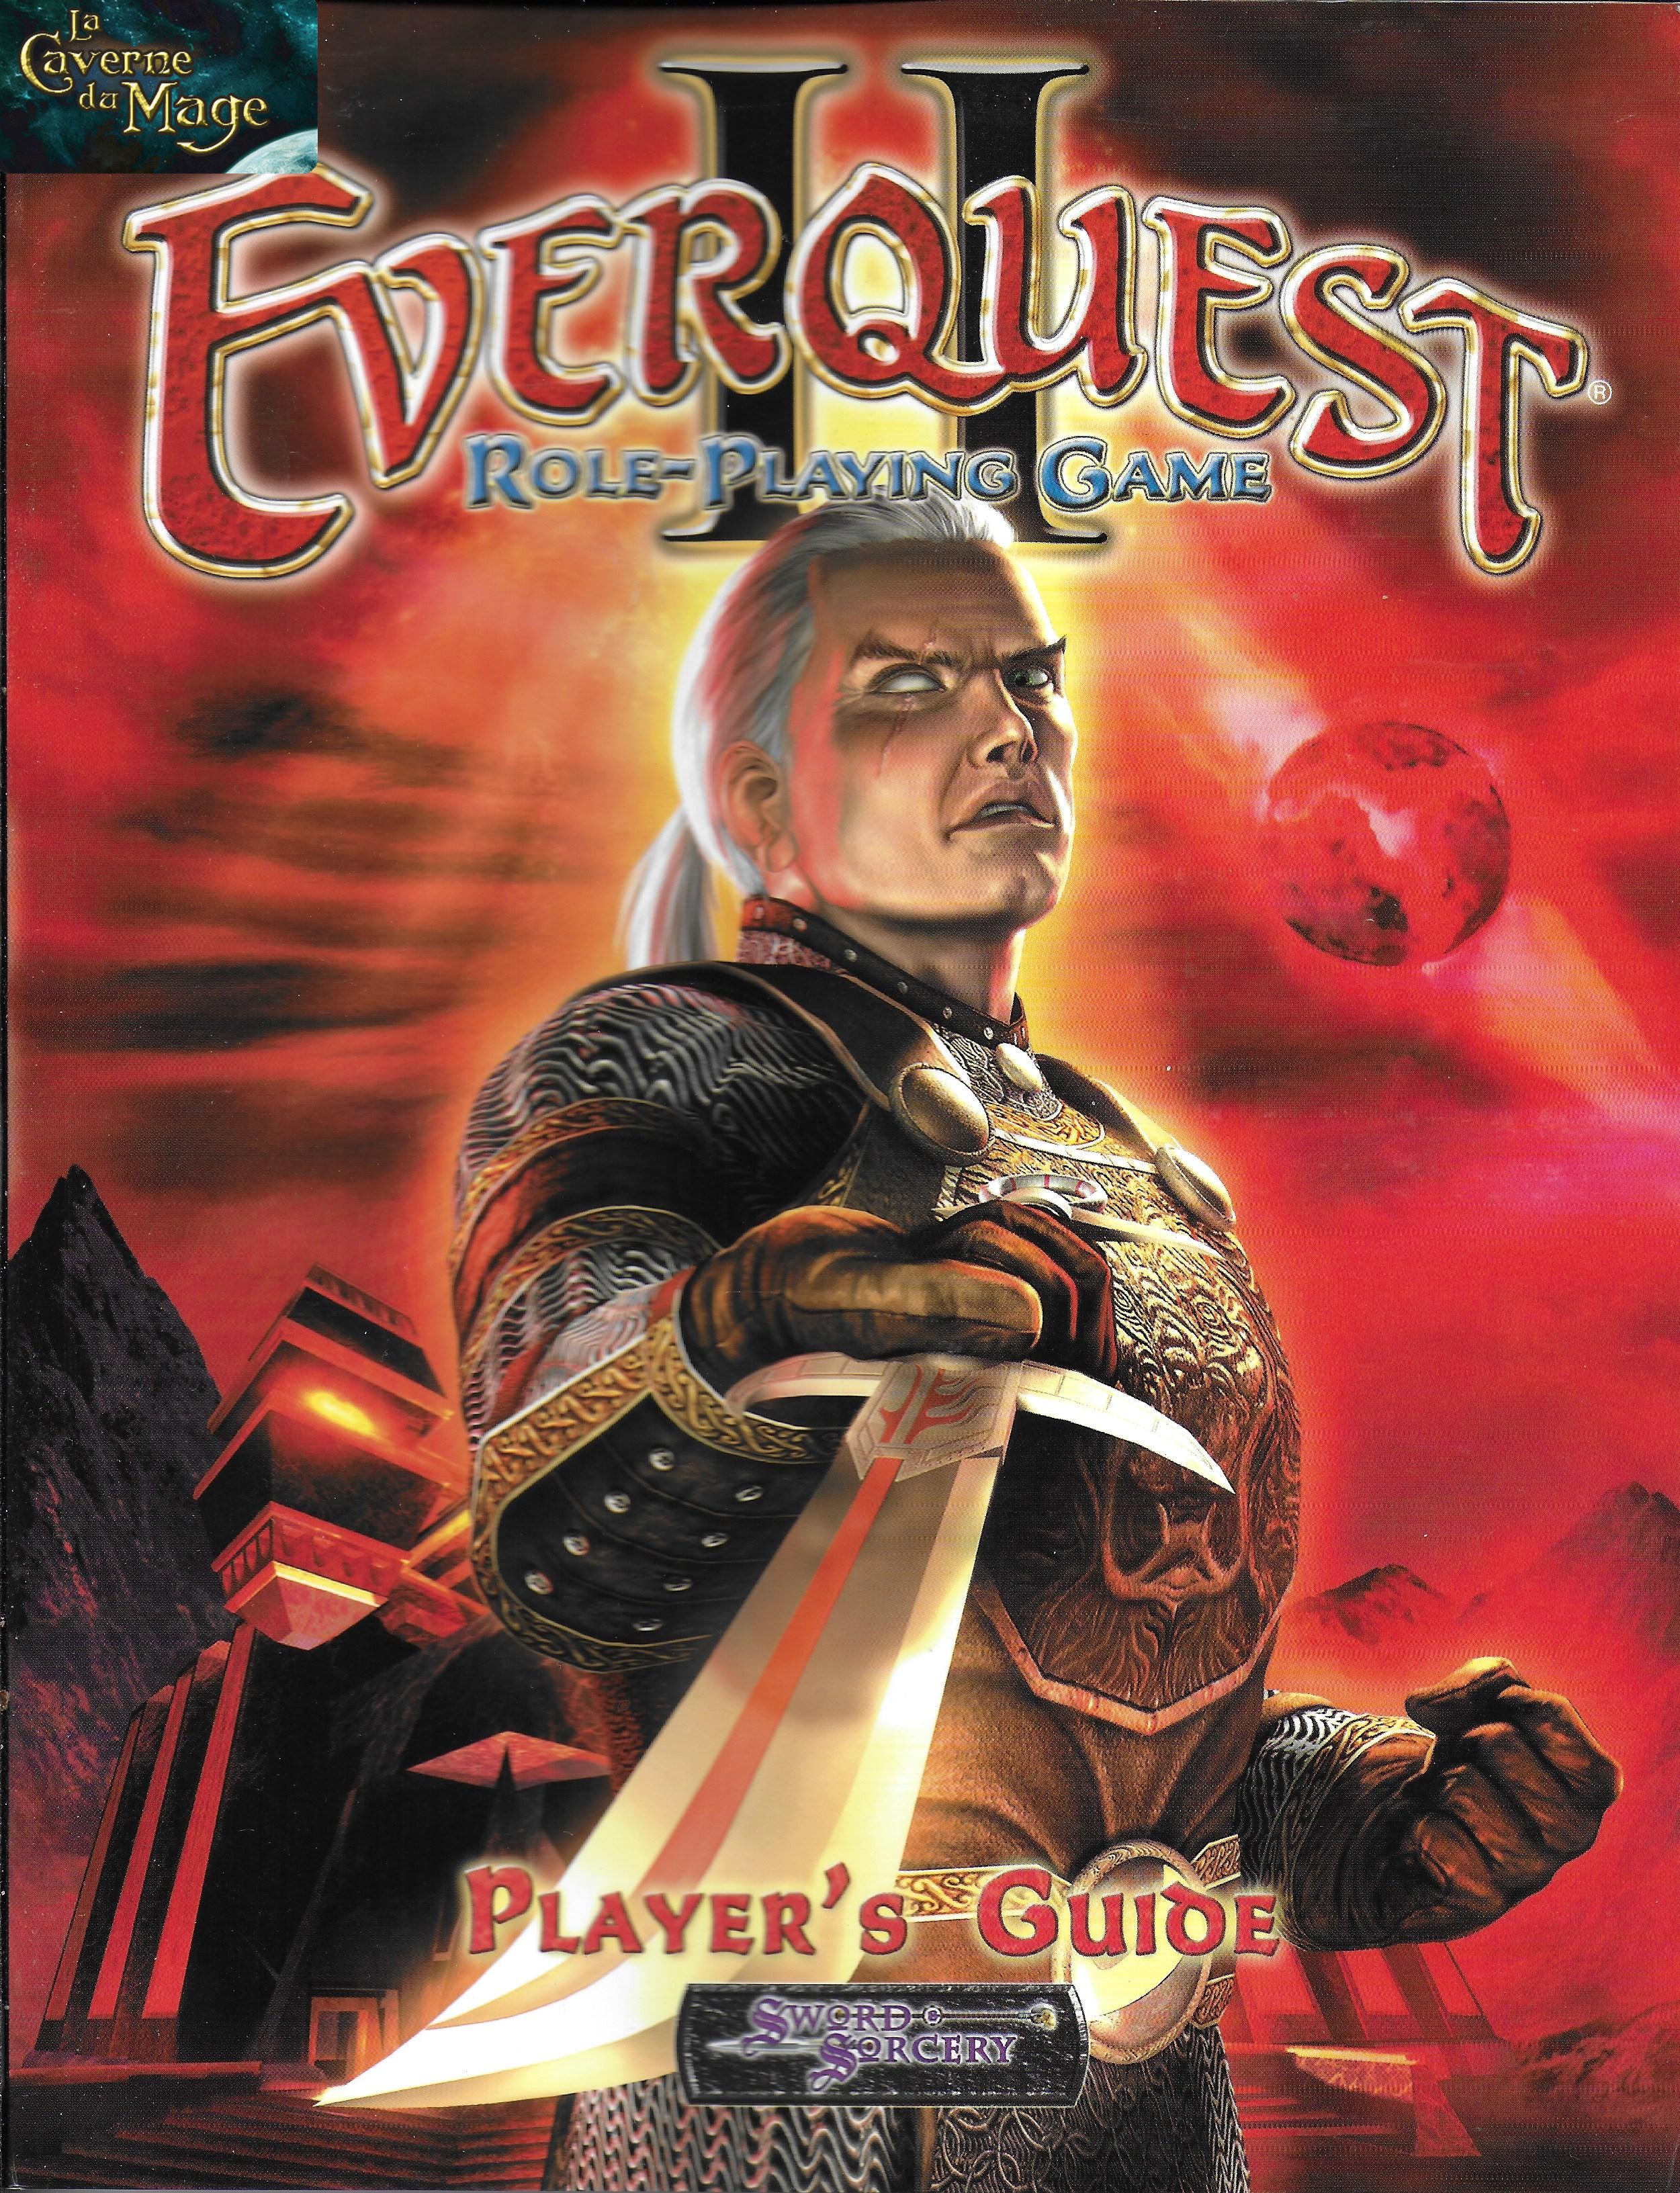 EVERQUEST II RPG - Player's Guide